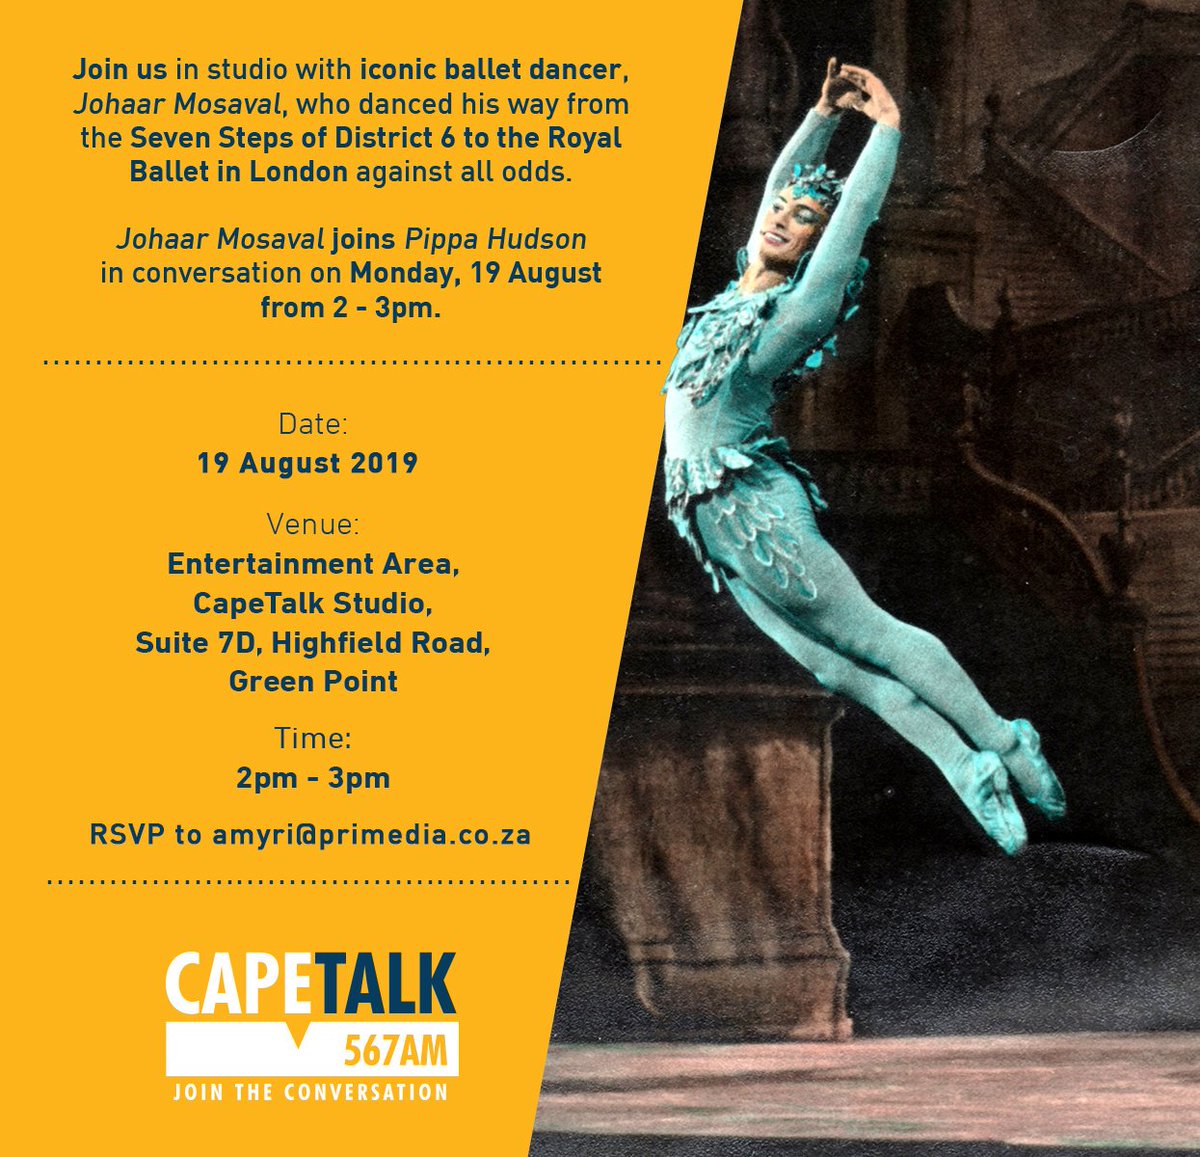 [SAVE THE DATE] He is an iconic #ballet dancer dancer & next week Monday (19 Aug) legend #JohaarMosaval will join @pjchudson for an hour conversation on his dance journey & life. Please share this invitation with any aspiring dancers & RSVP as per below.